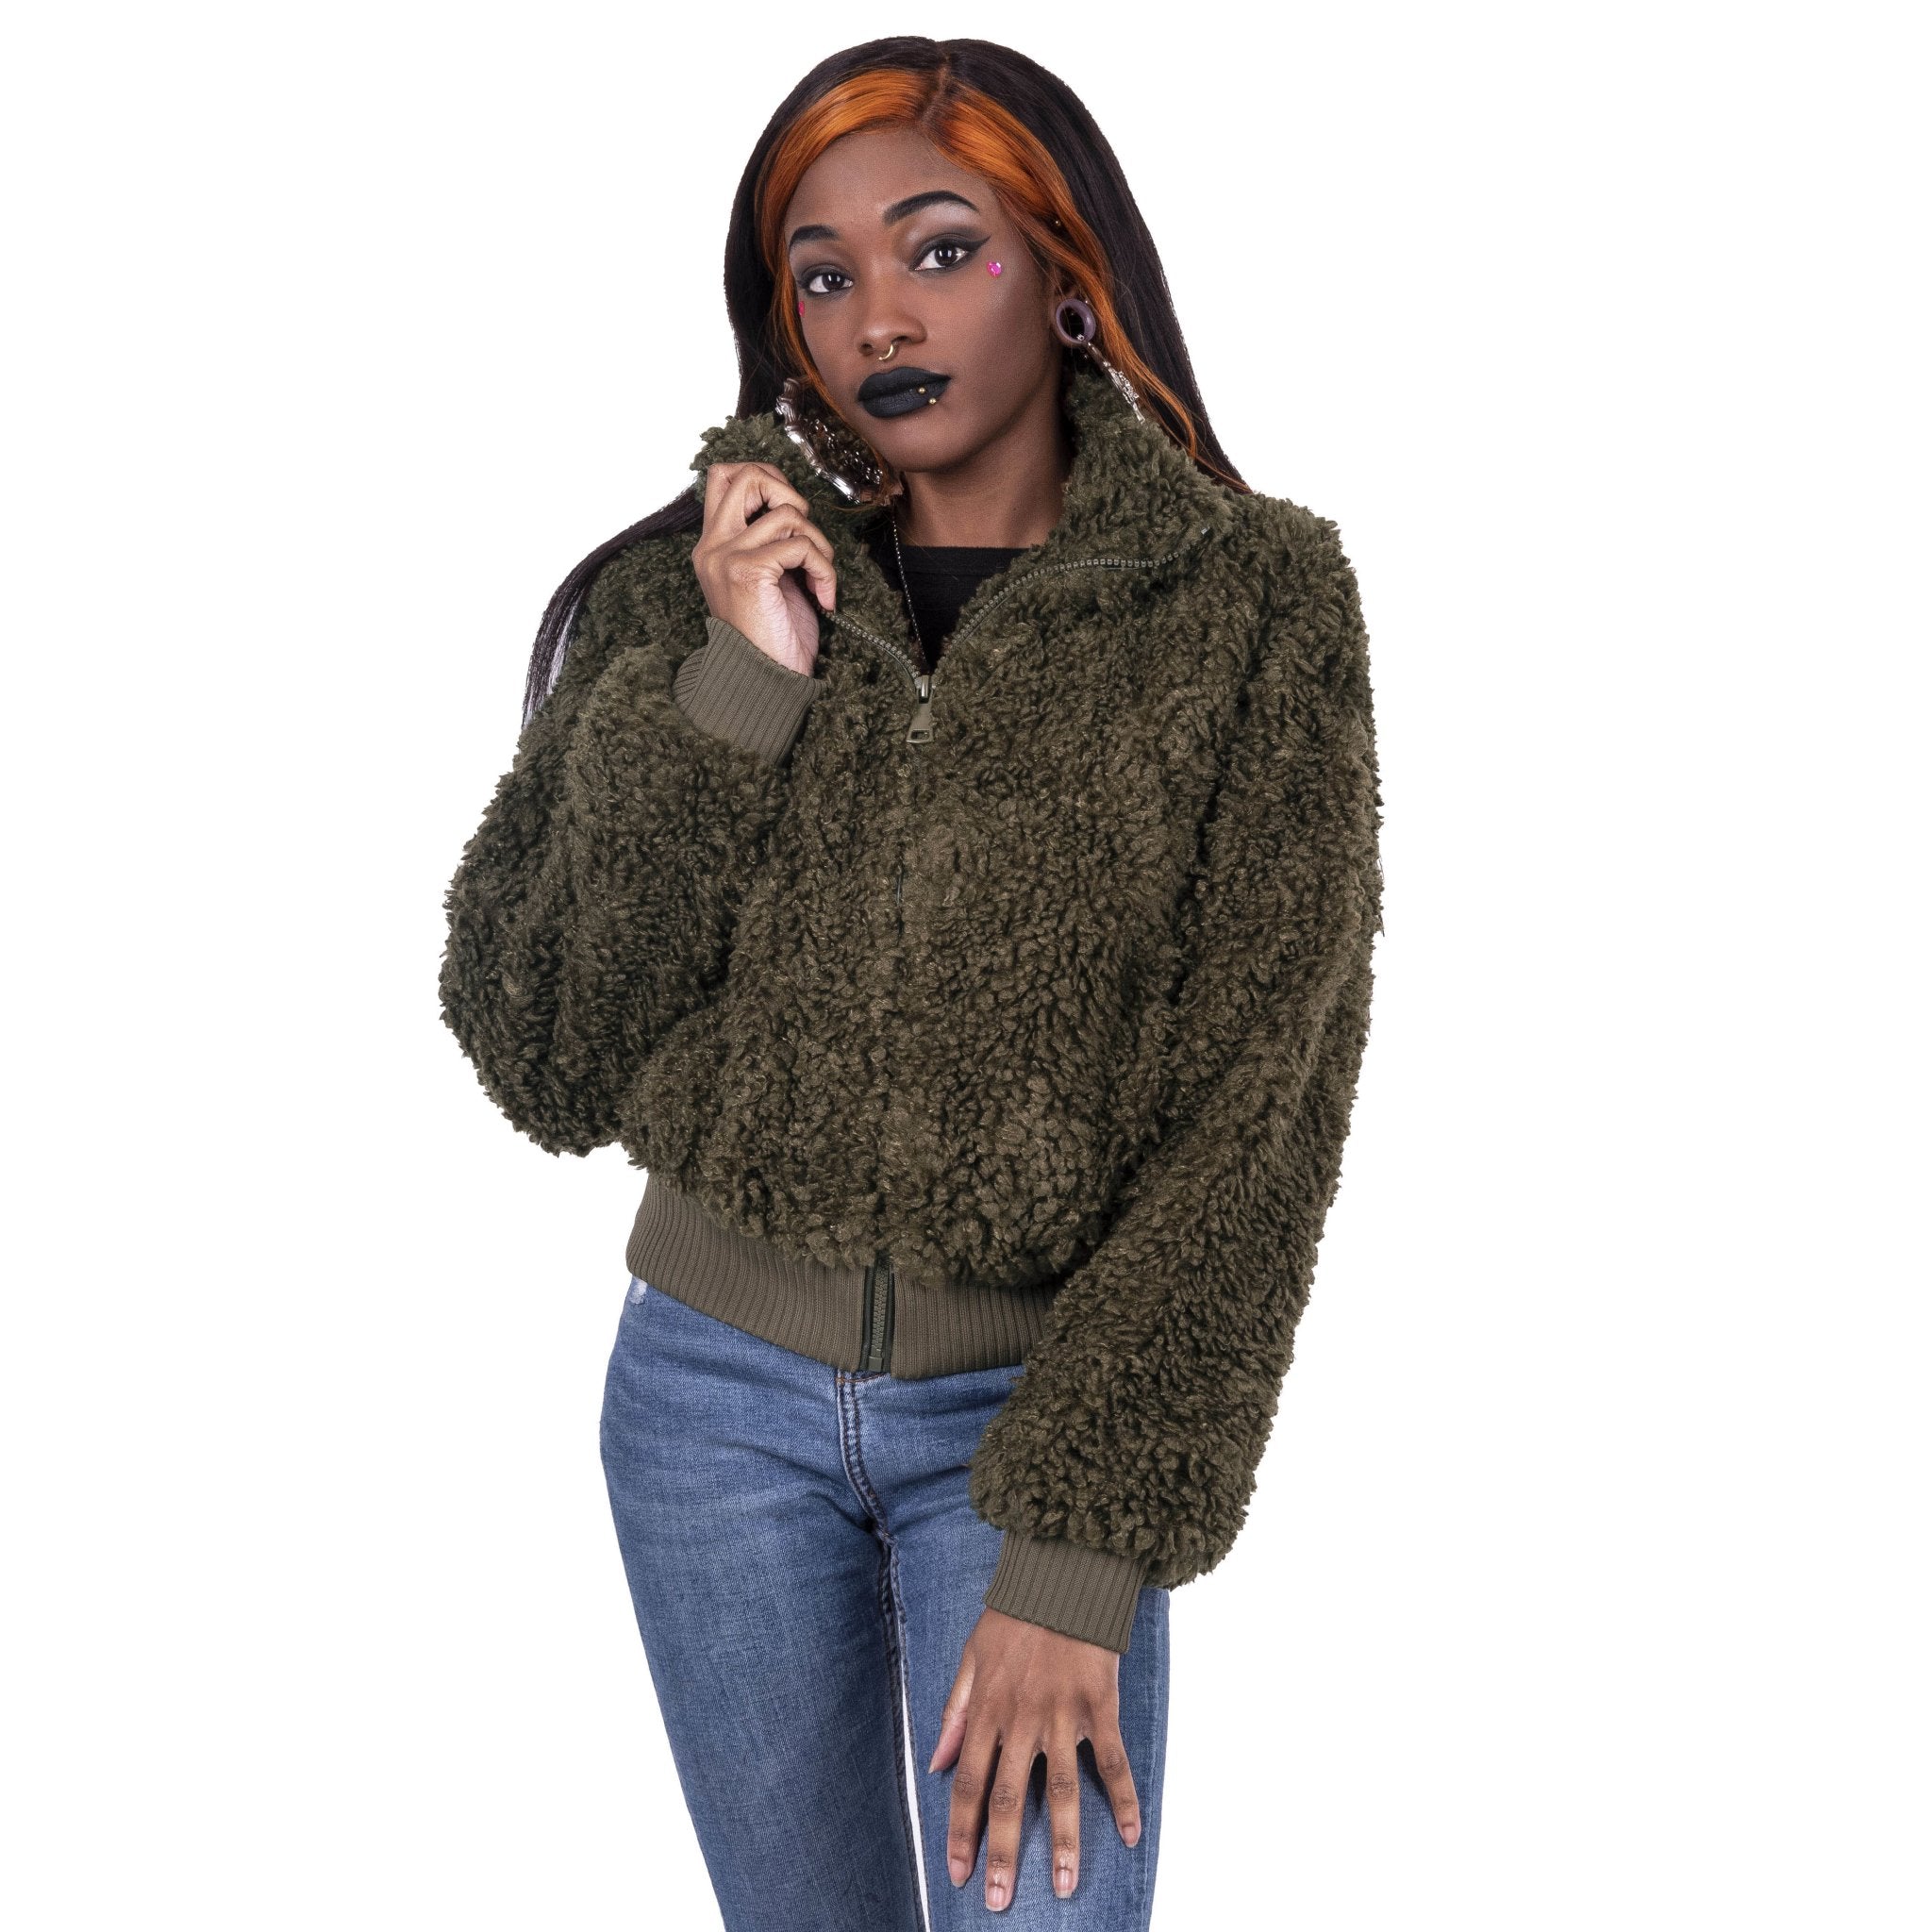 Too Fast | Bomber Jacket | Full Zip Army Green Sherpa